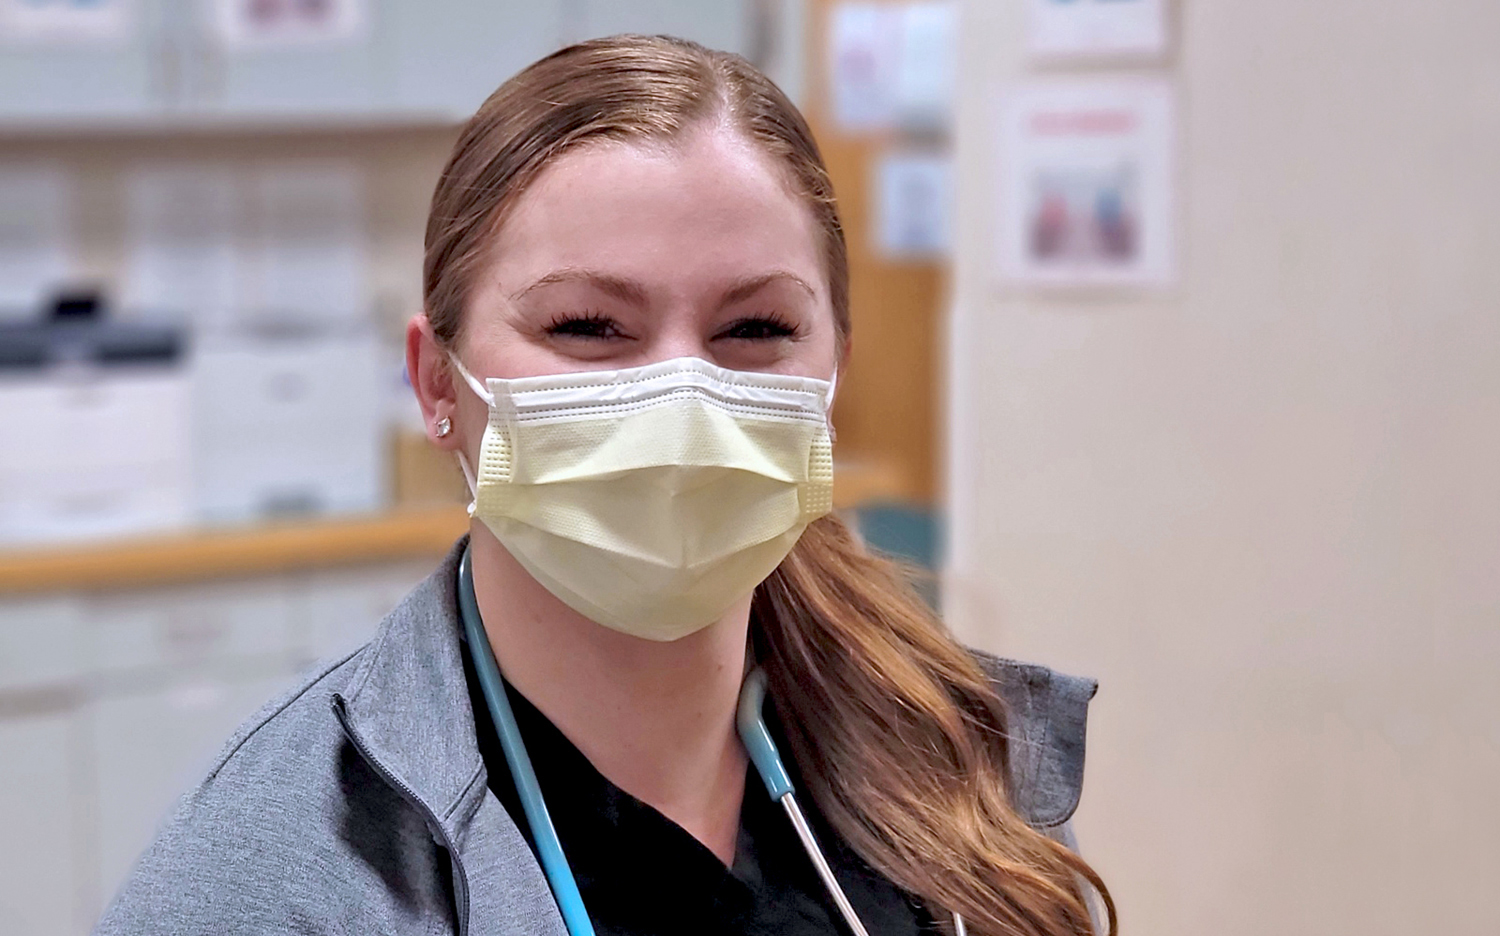 For Amber Abderrazzaq, RN, working at Whittier is full of opportunities and professional growth.